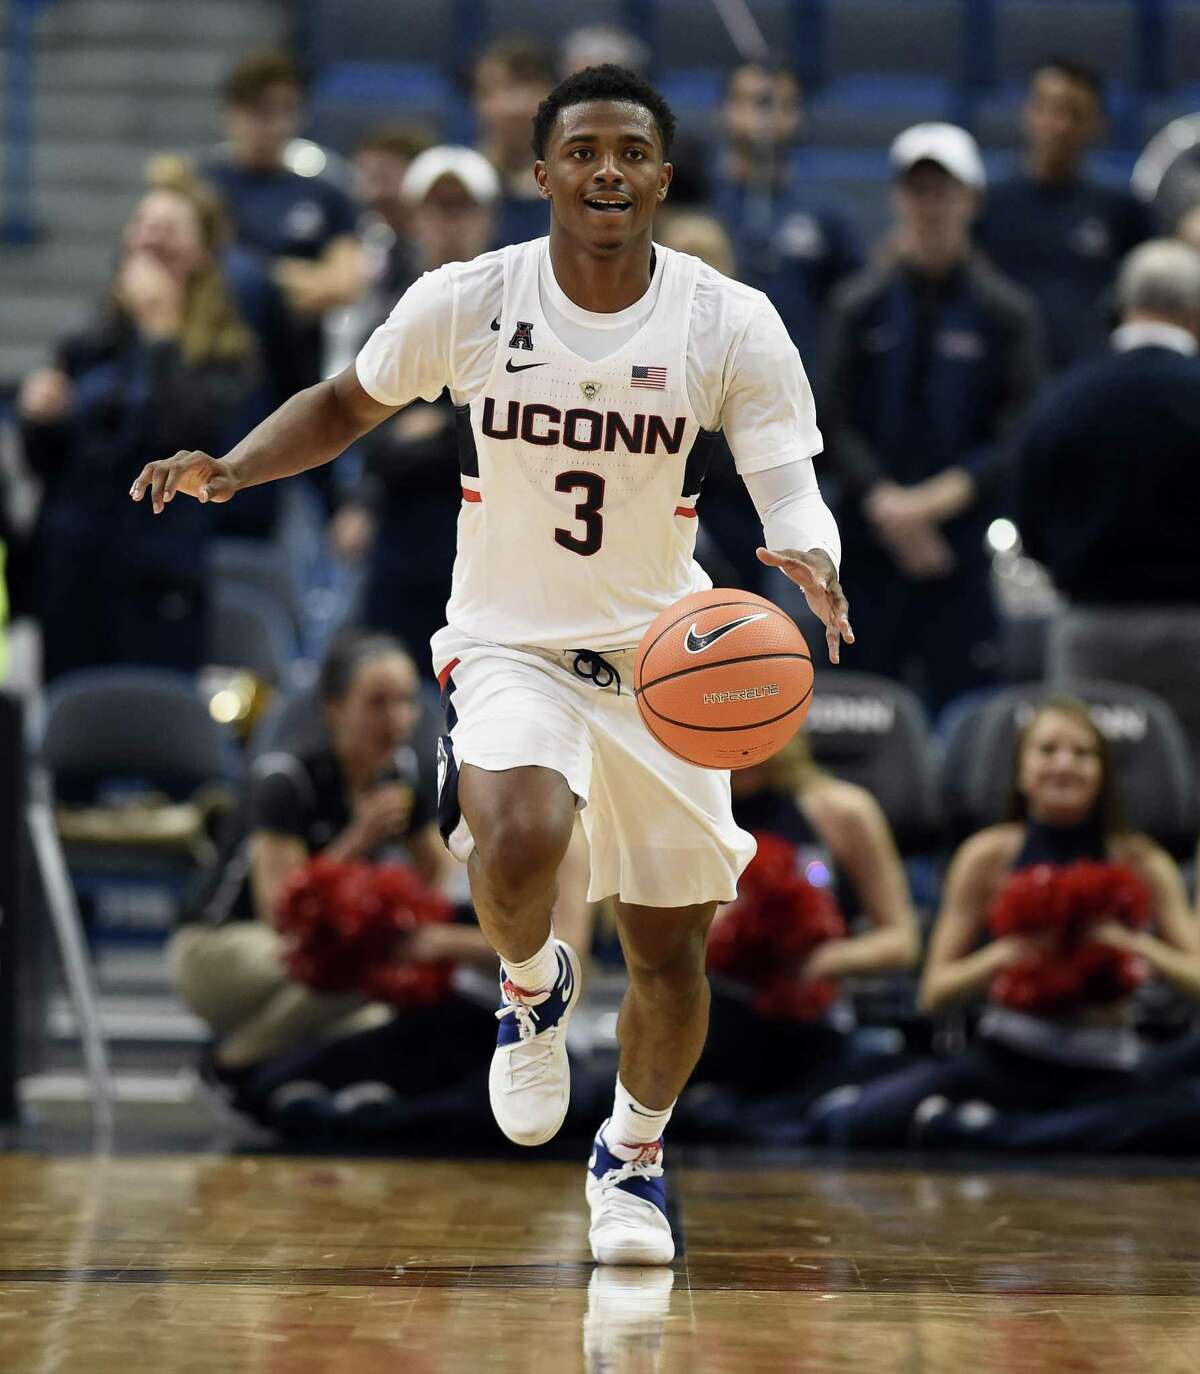 Connecticut's Alterique Gilbert during the second half of an NCAA college exhibition basketball game, Monday, Oct. 30, 2017, in Hartford, Conn. (AP Photo/Jessica Hill)